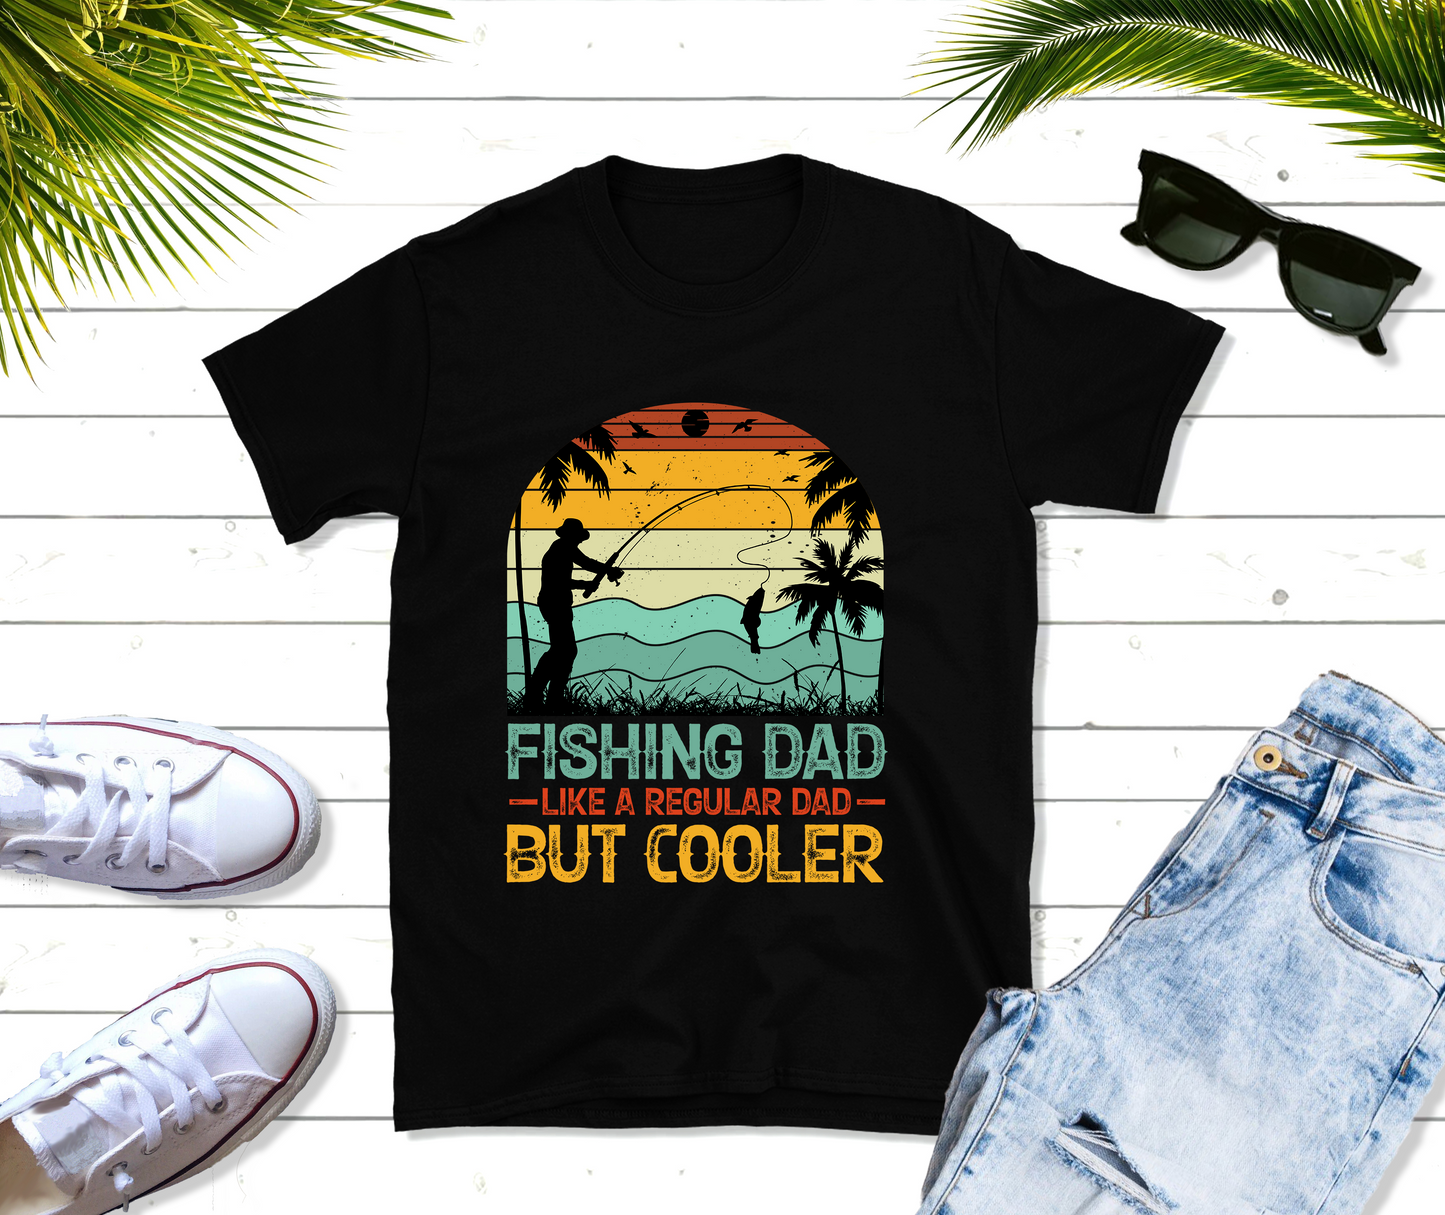 Fishing Dad: Like a Regular Dad, But Cooler T-Shirt | Unisex Fishing Tee | Father's Day Gift